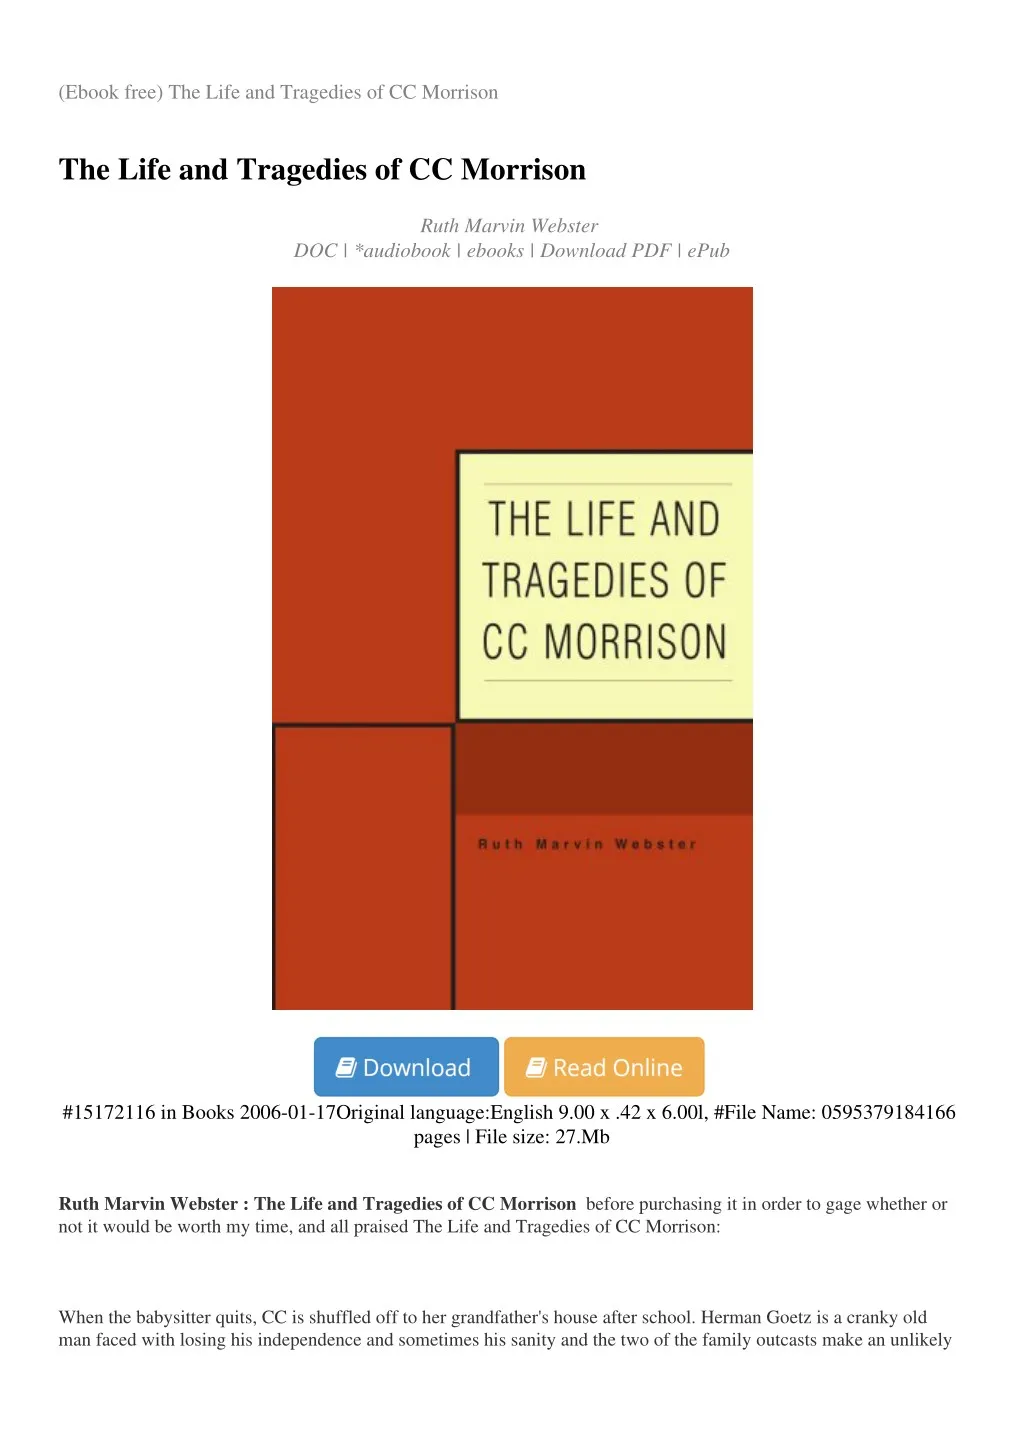 ebook free the life and tragedies of cc morrison